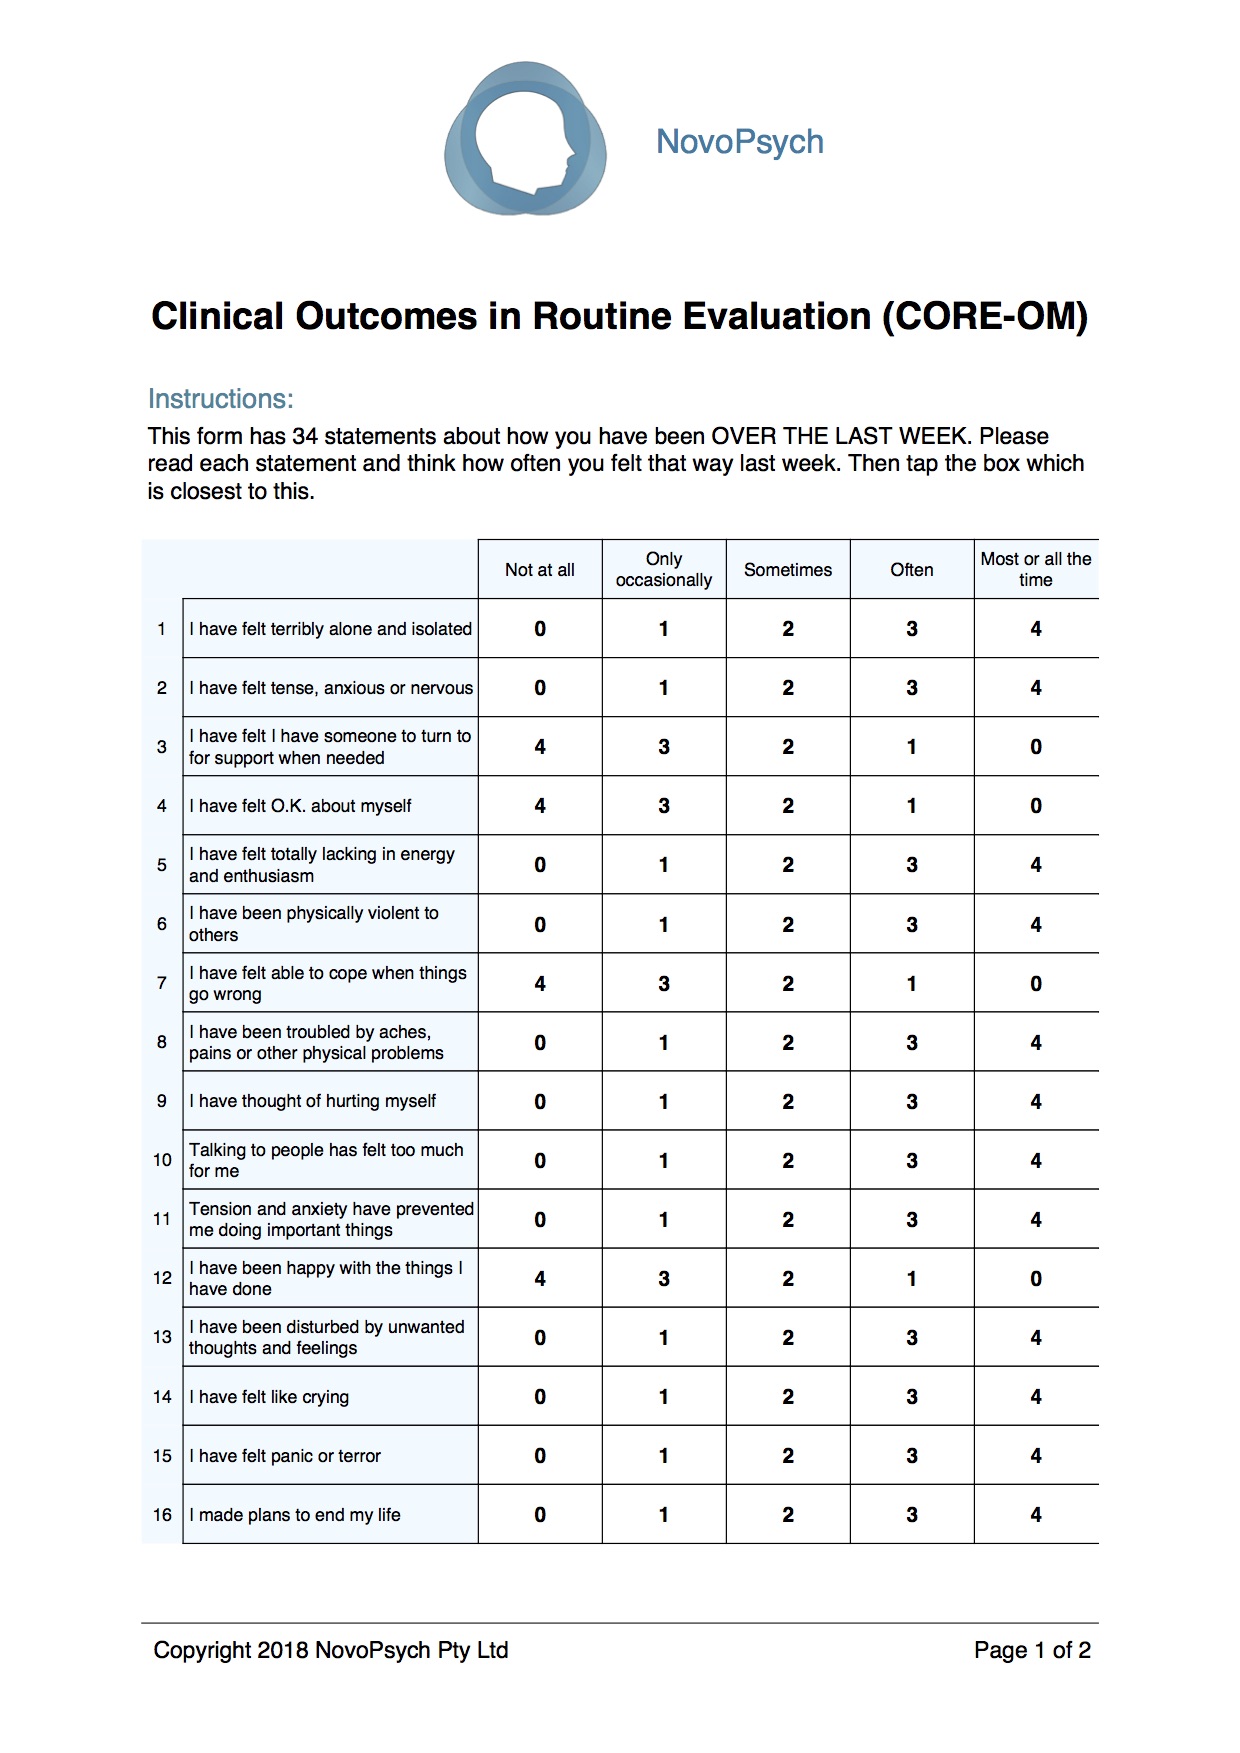 Instrument repository : Clinical Outcomes in Routine Evaluation (and CST)